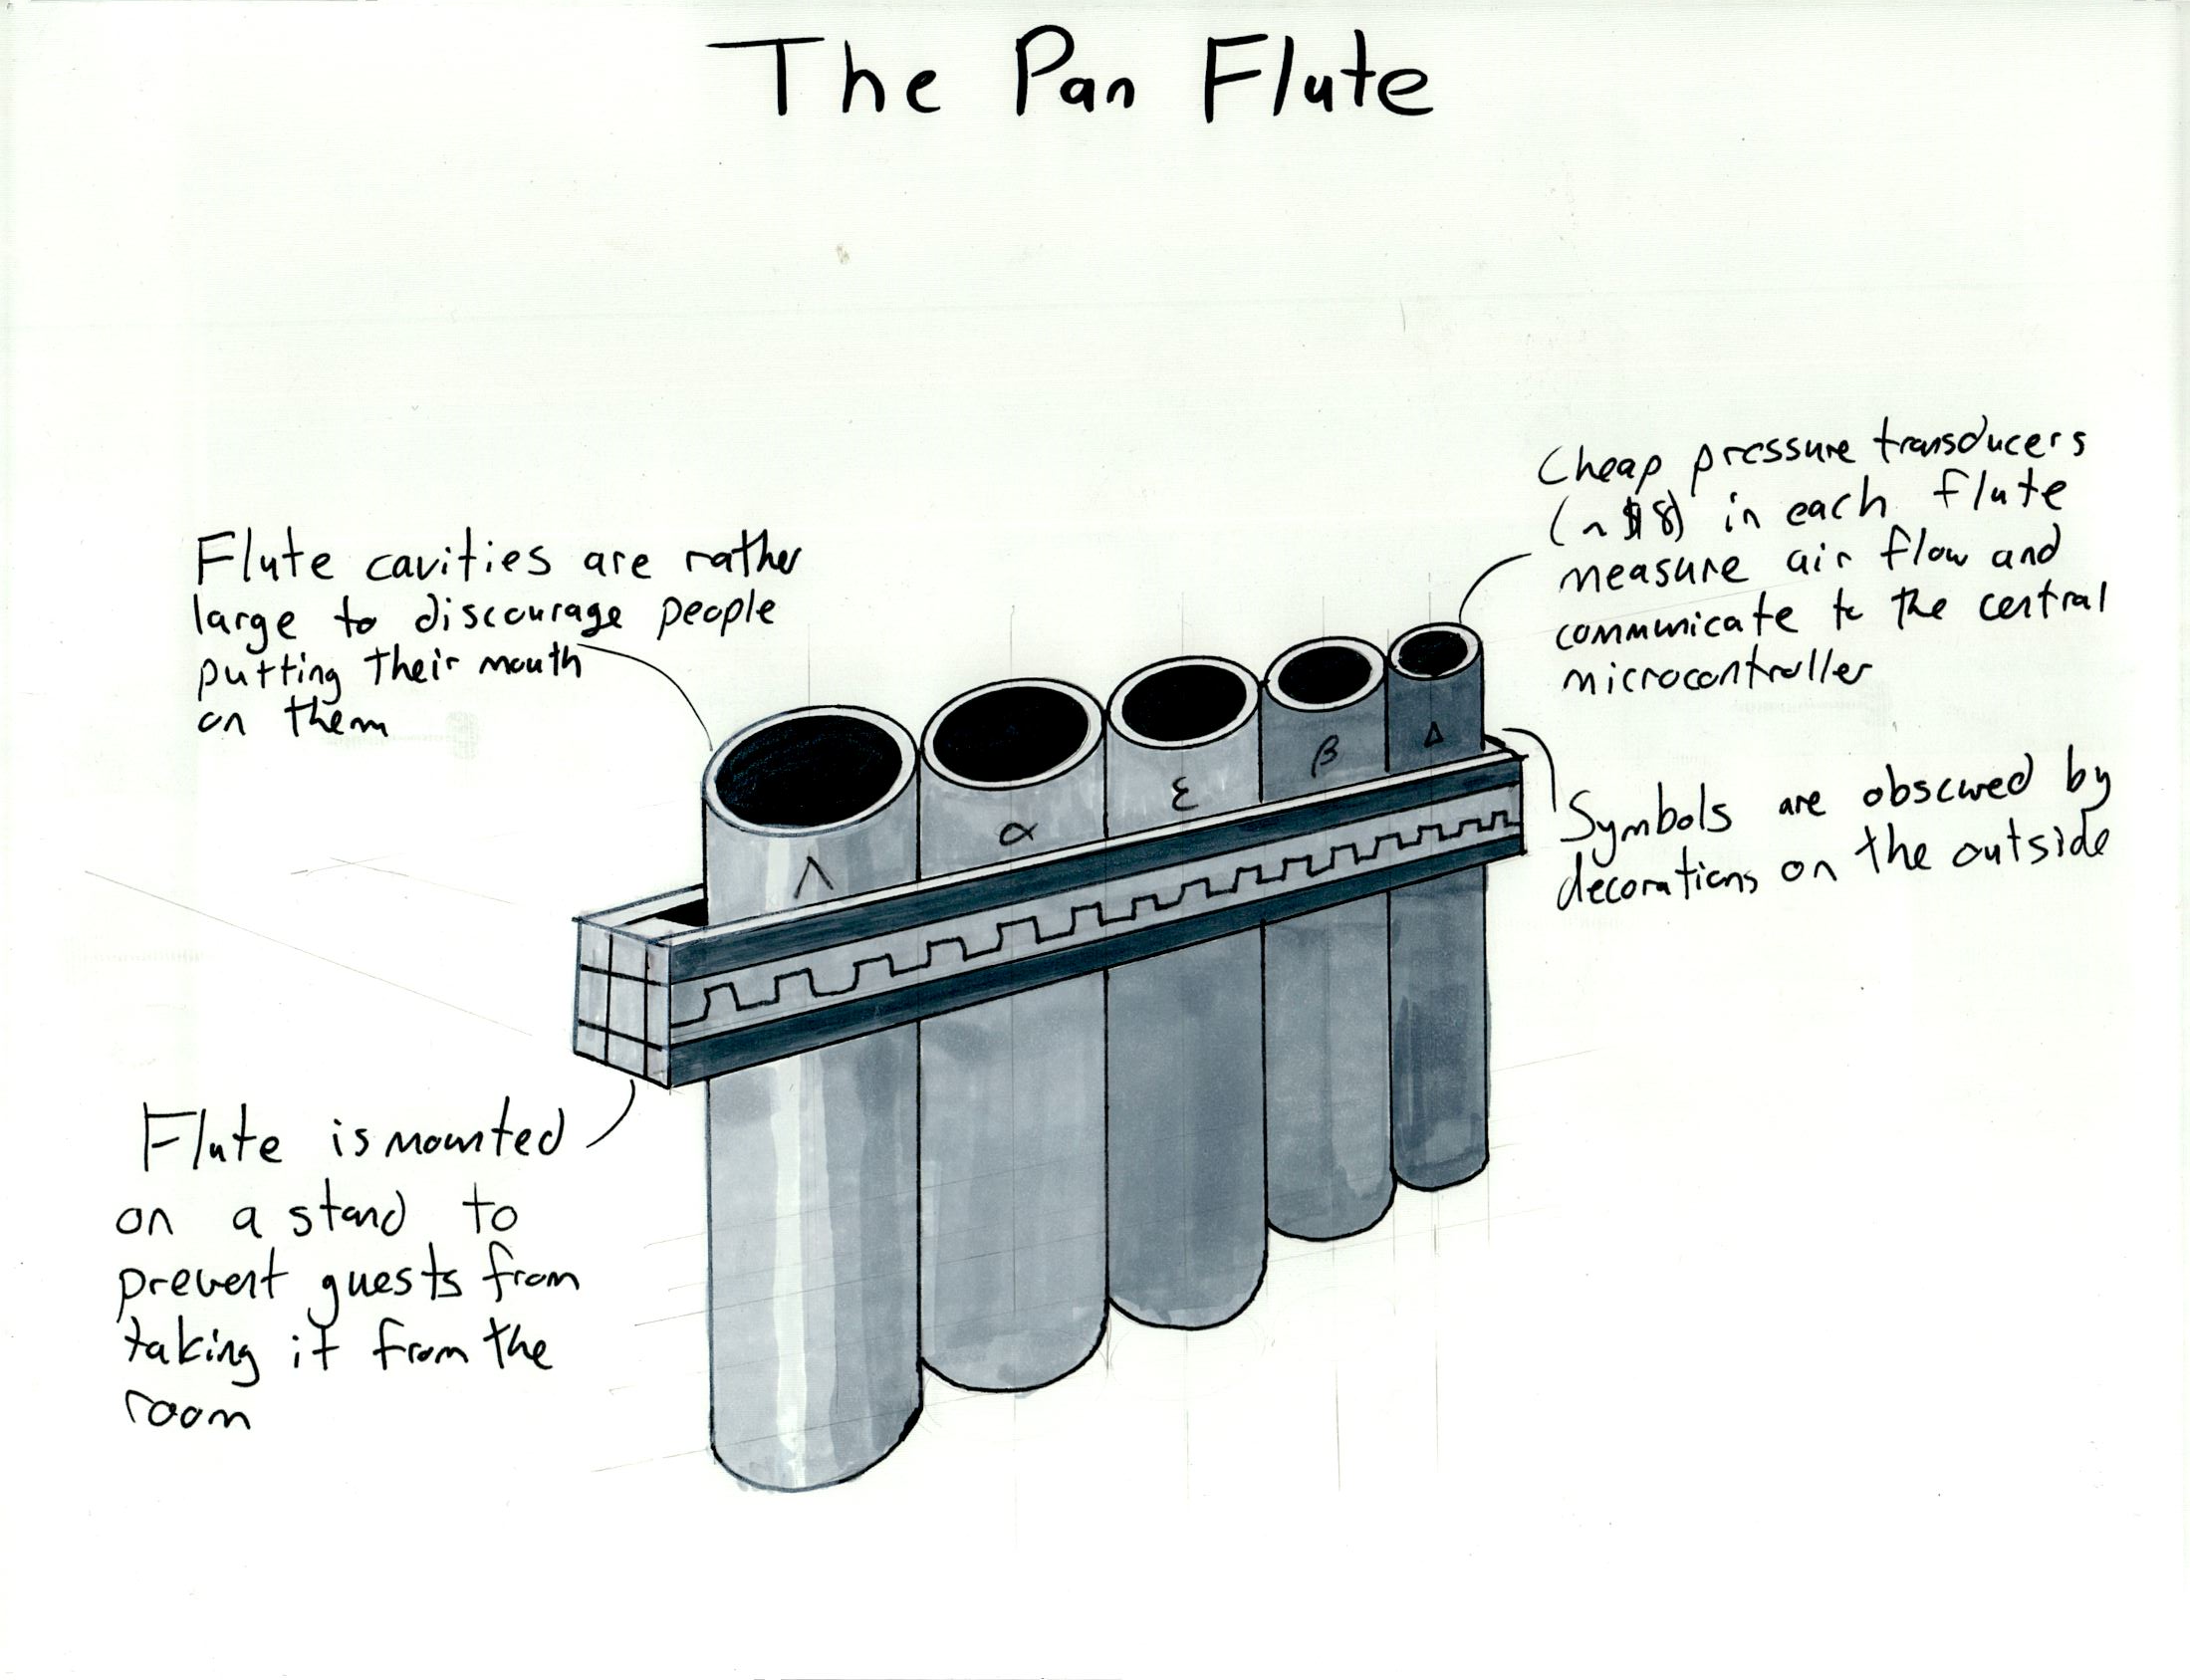 The Pan Flute